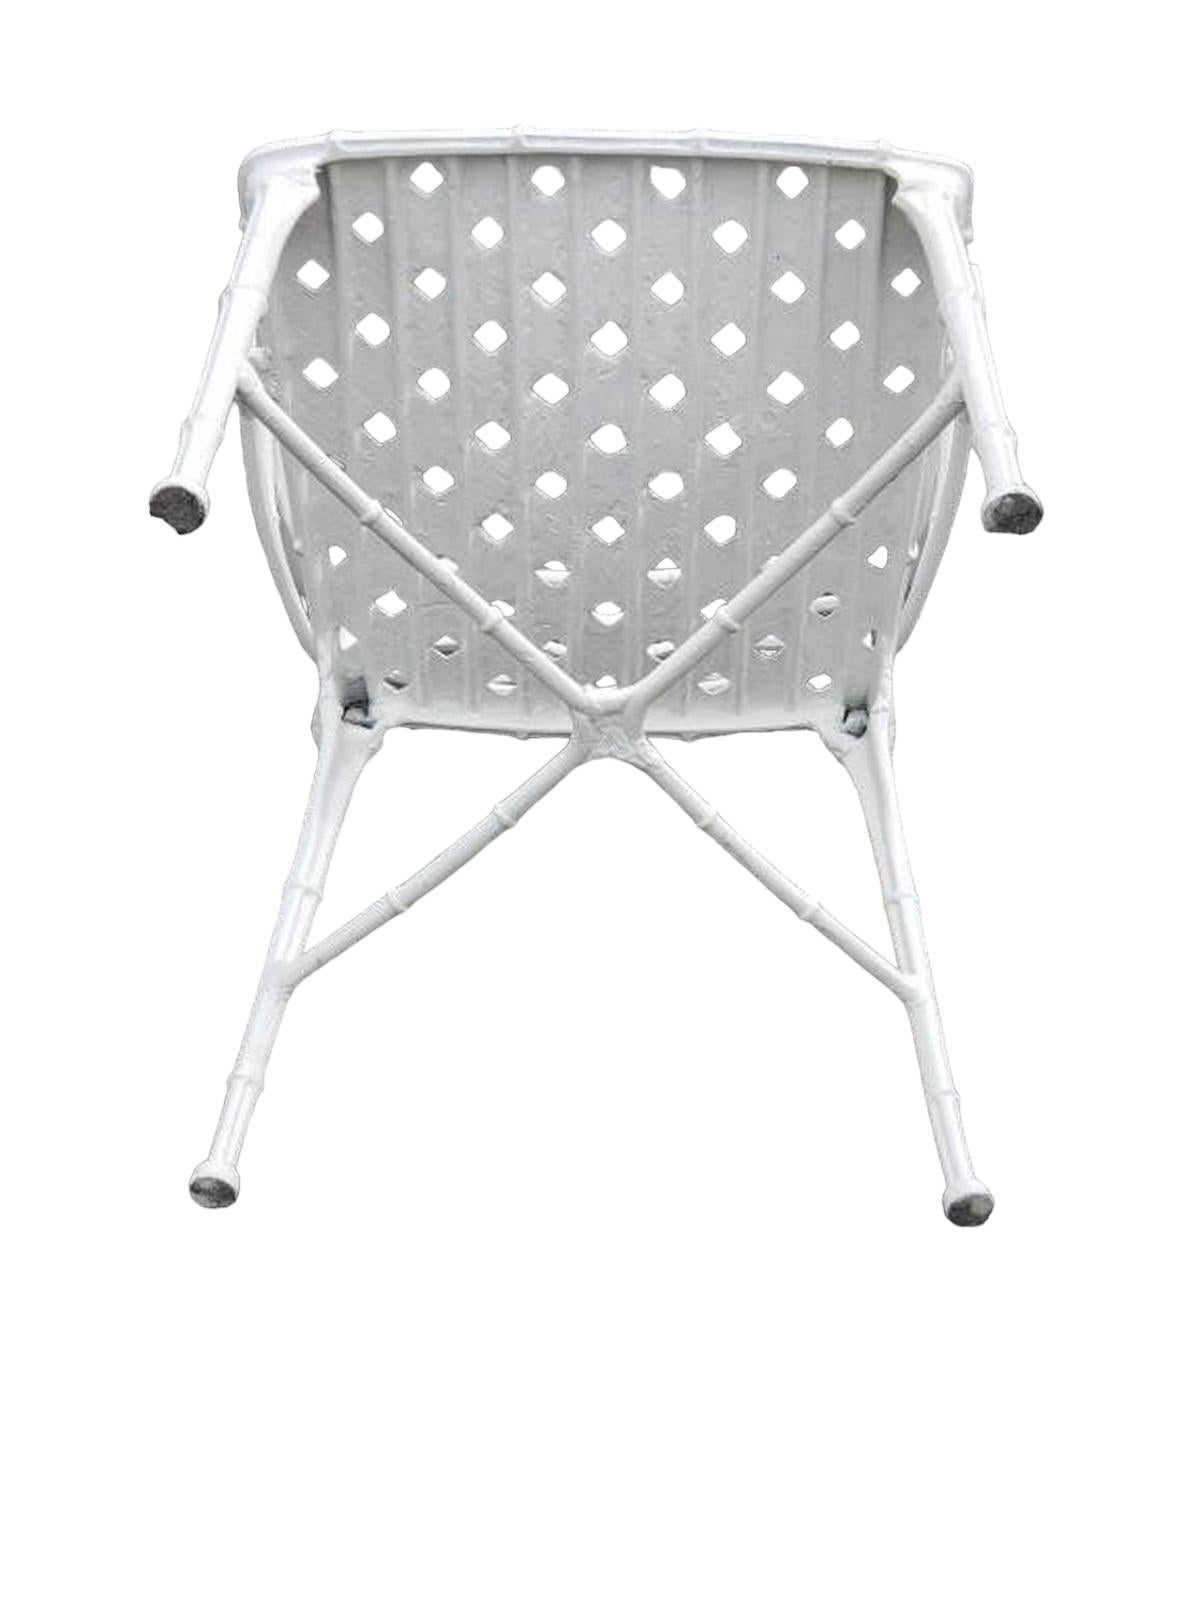 Set of four metal  Patio Set Chairs in  Beautiful aged white paint. Wear from age and use tot he body. 
Chairs 20w. x 17.5d x 32.5 h

We are also listing the Brown Jordan Table with glass top separately as shown with the chairs in the last image. 